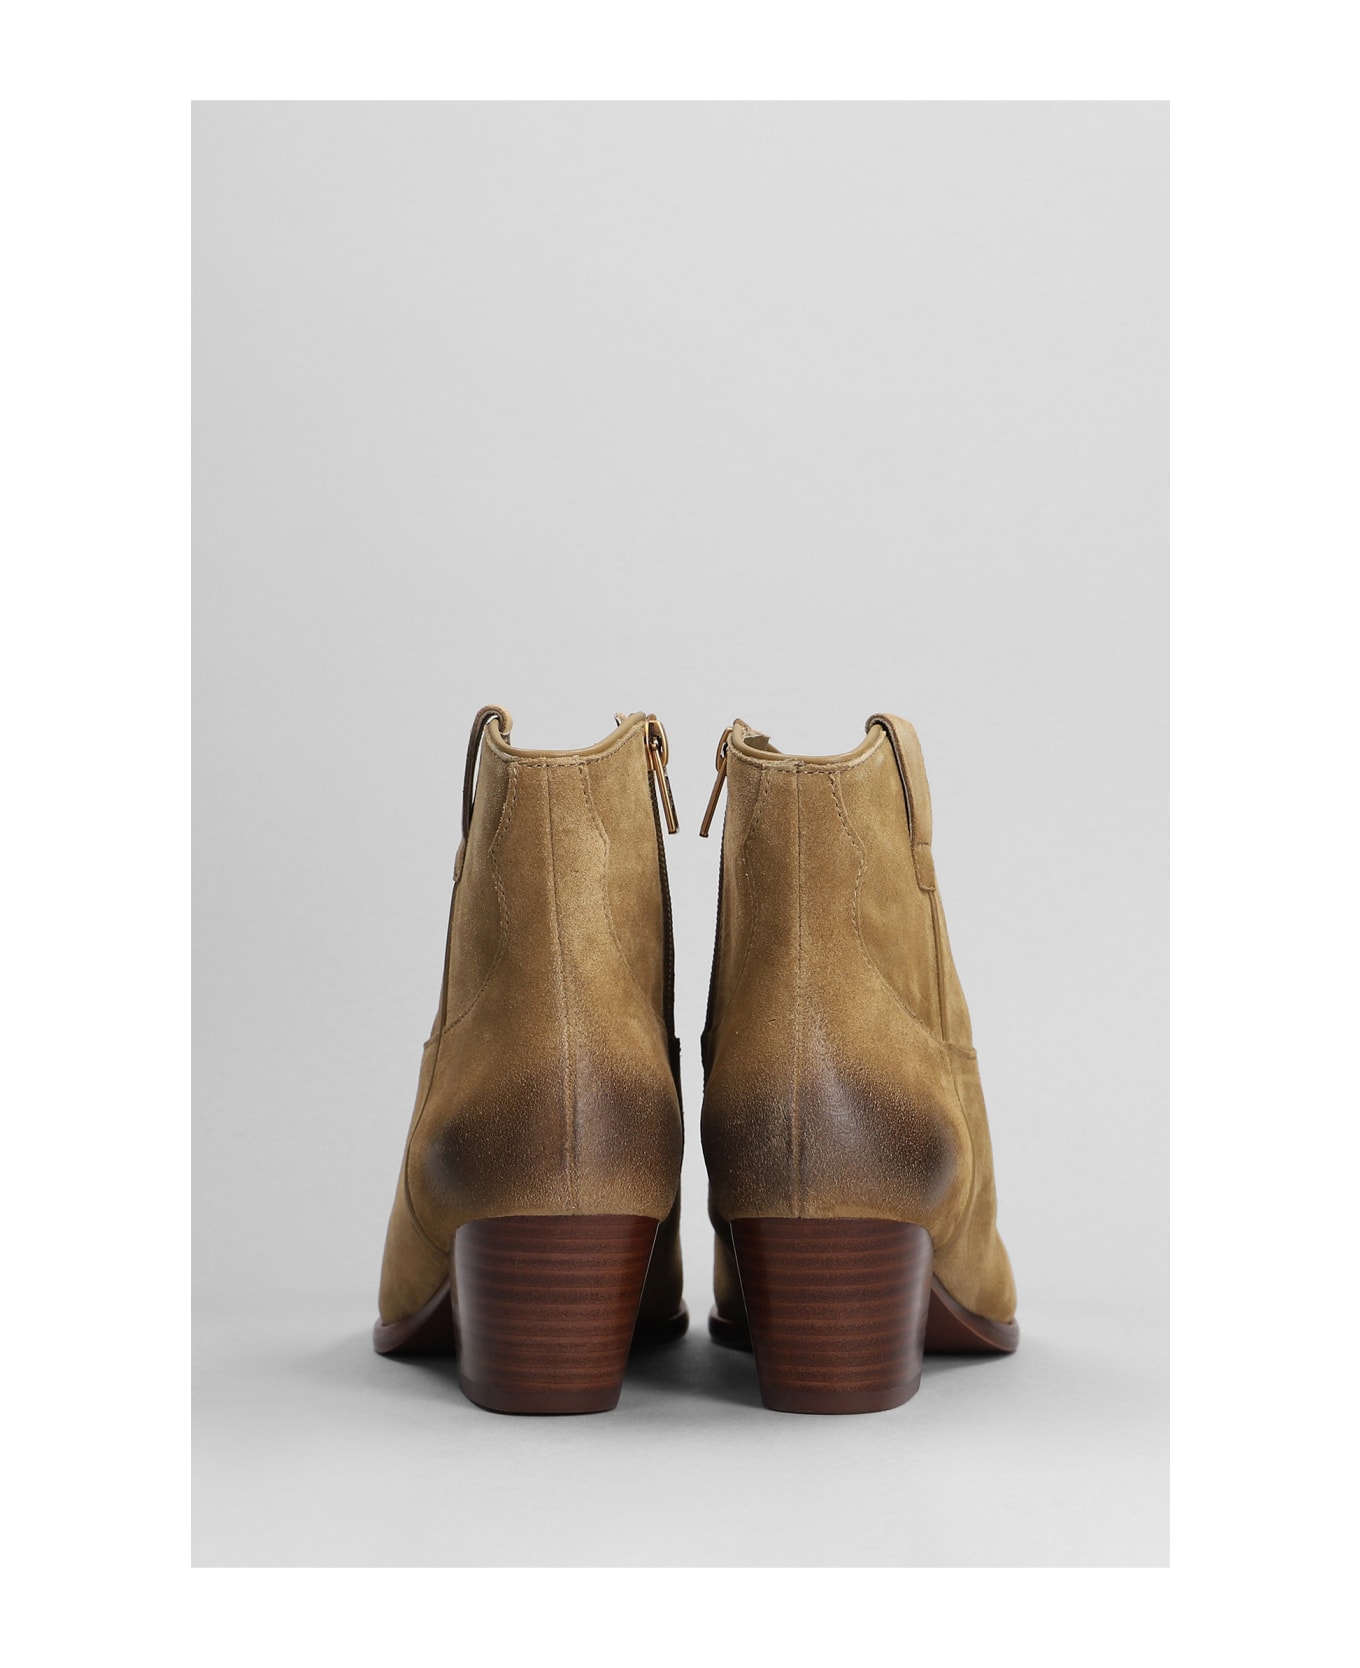 Ash Fame Texan Ankle Boots In Brown Suede - brown